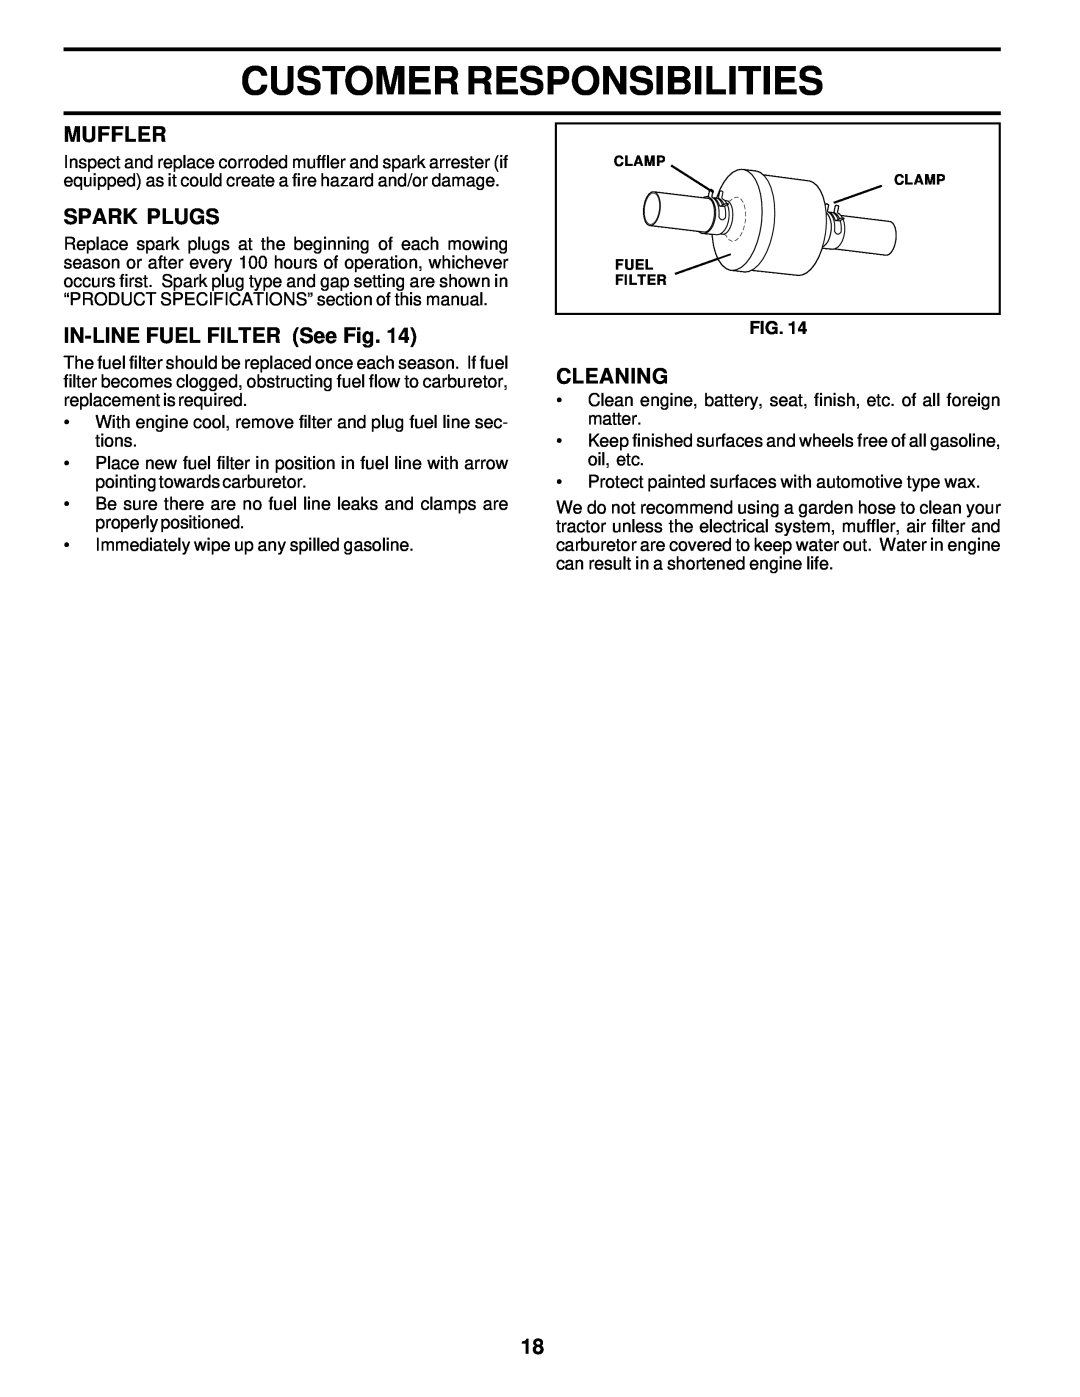 Weed Eater 177677 owner manual Muffler, Spark Plugs, IN-LINEFUEL FILTER See Fig, Cleaning, Customer Responsibilities 